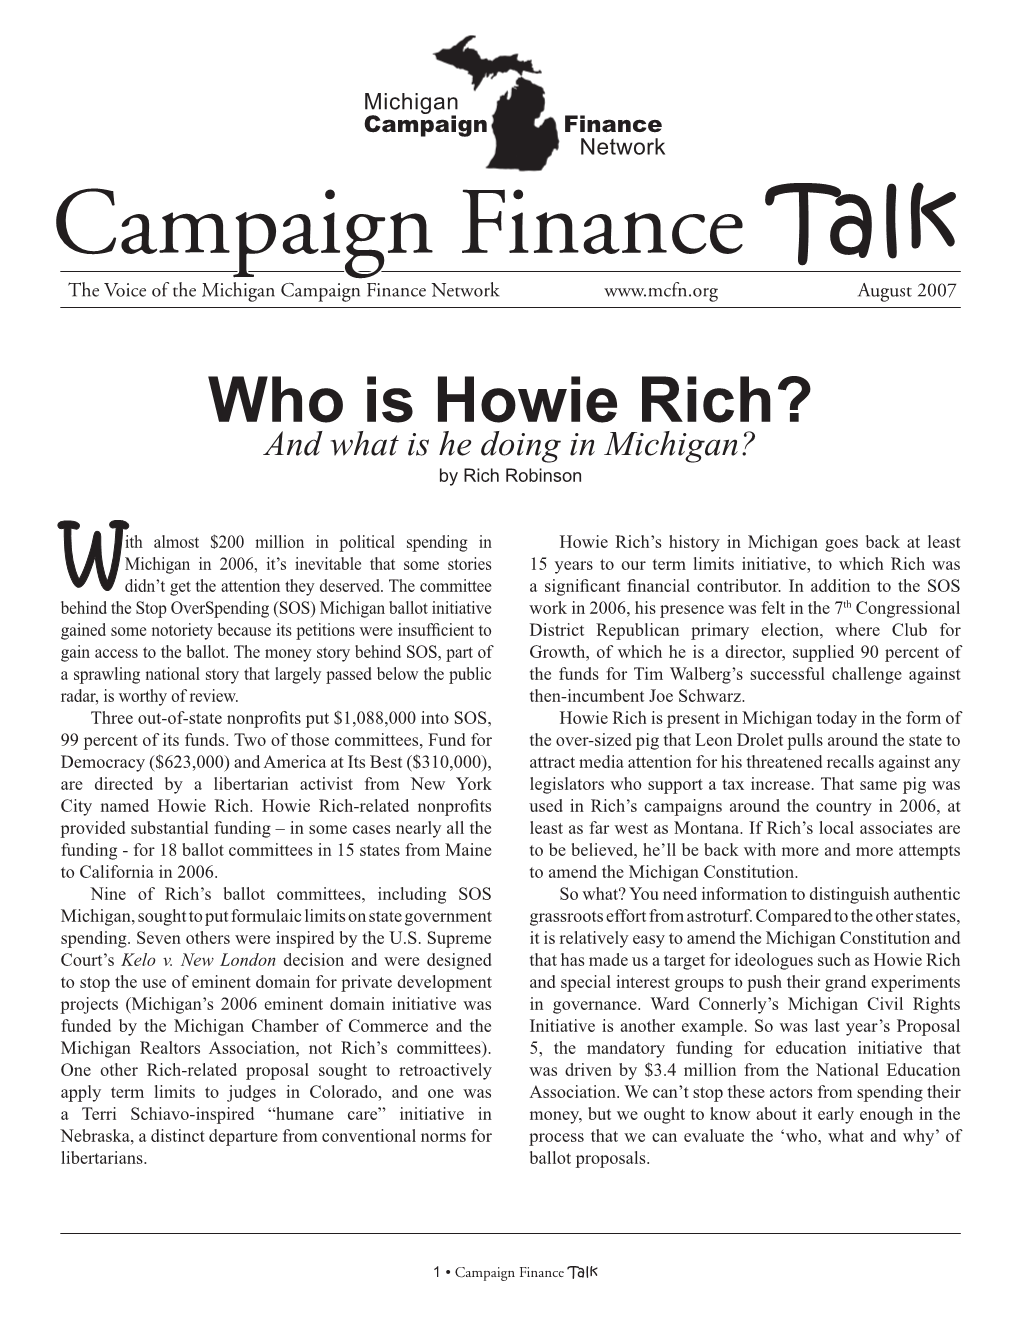 Campaign Finance Talk the Voice of the Michigan Campaign Finance Network August 2007